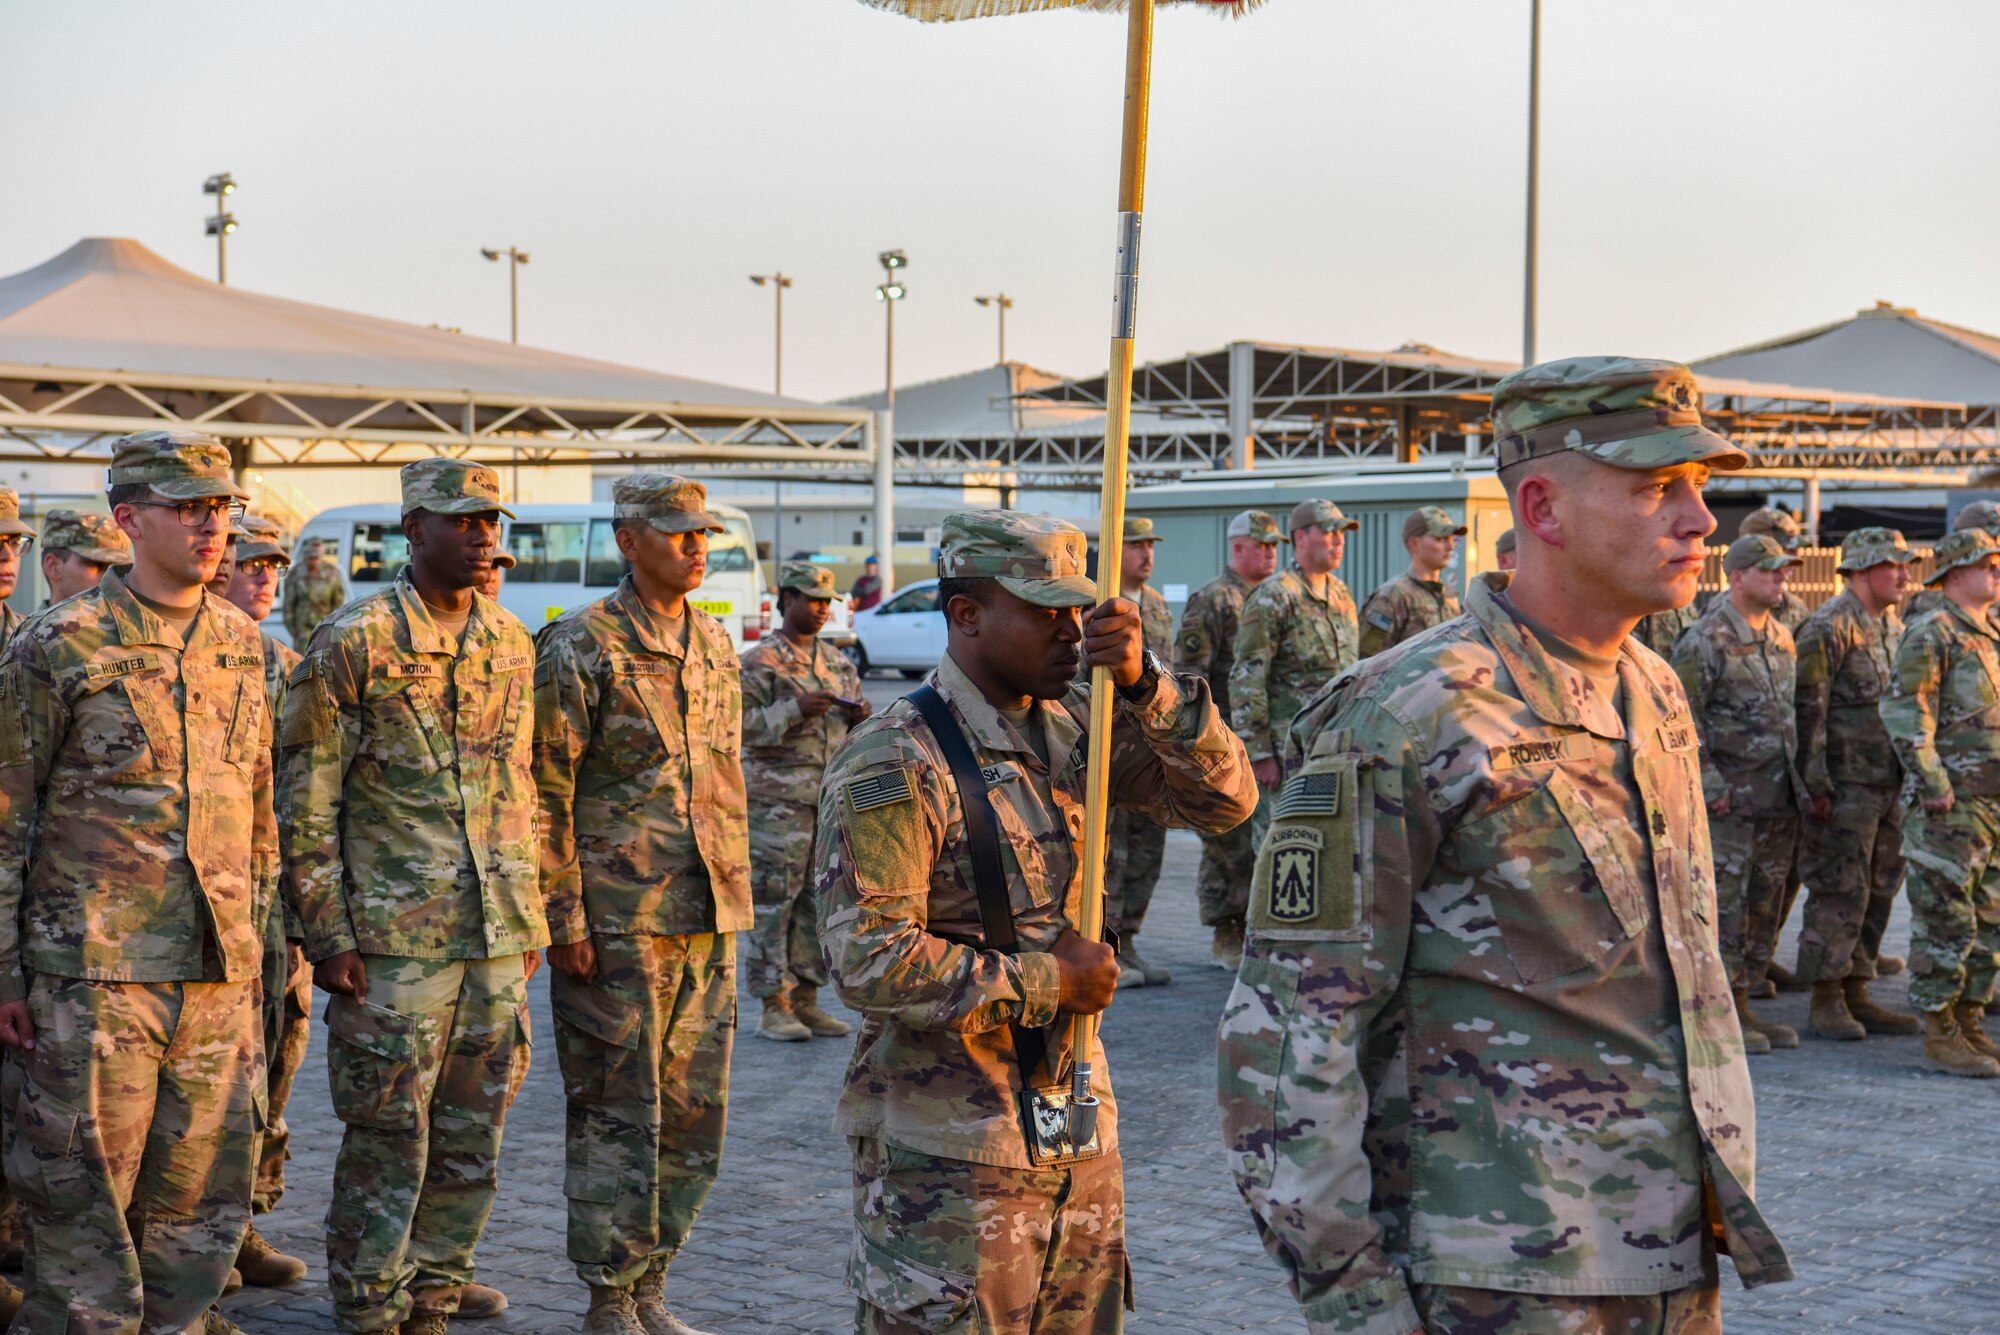 Army LTC Michael R. Rodick, 1st Battalion, 43rd Artillery Regiment Commander, leads his soldiers in formation during a monthly retreat ceremony at Al Dhafra Air Base, United Arab Emirates, Dec. 7, 2018.